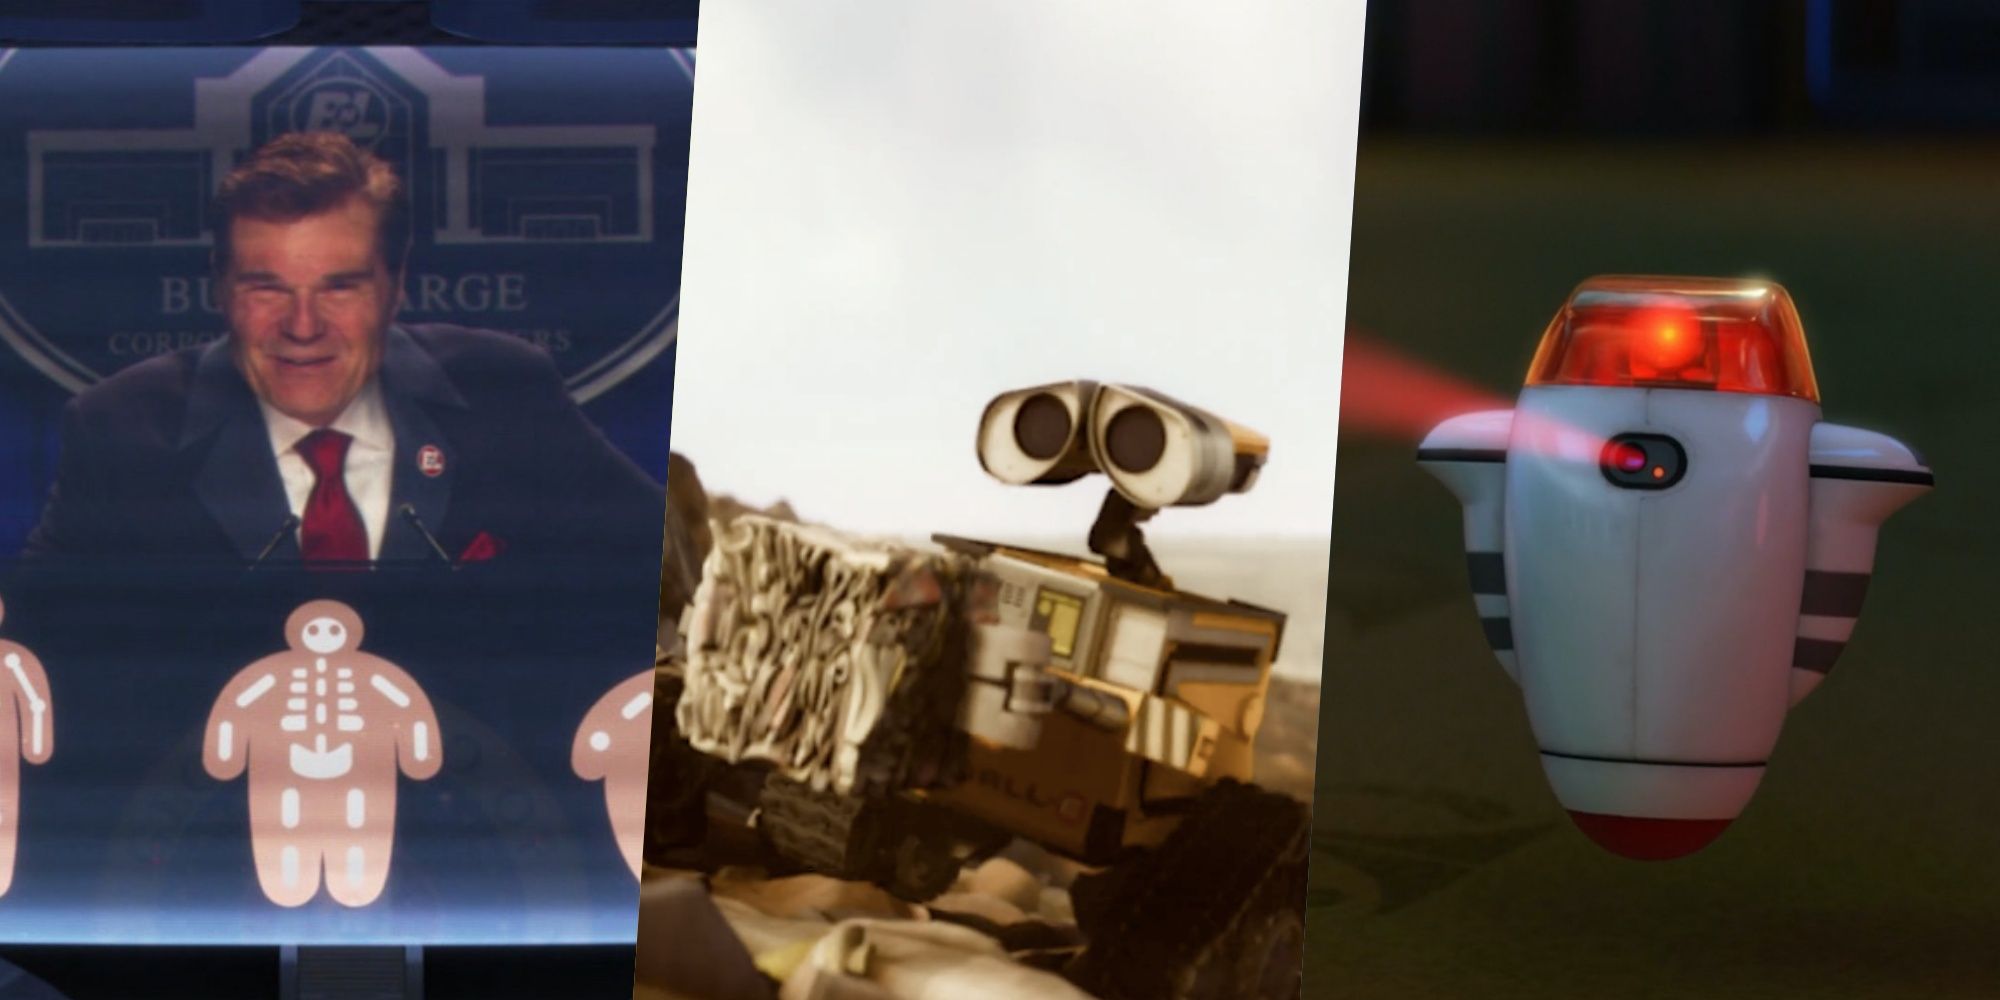 10 Ways That WallE Is Scary & Disturbing